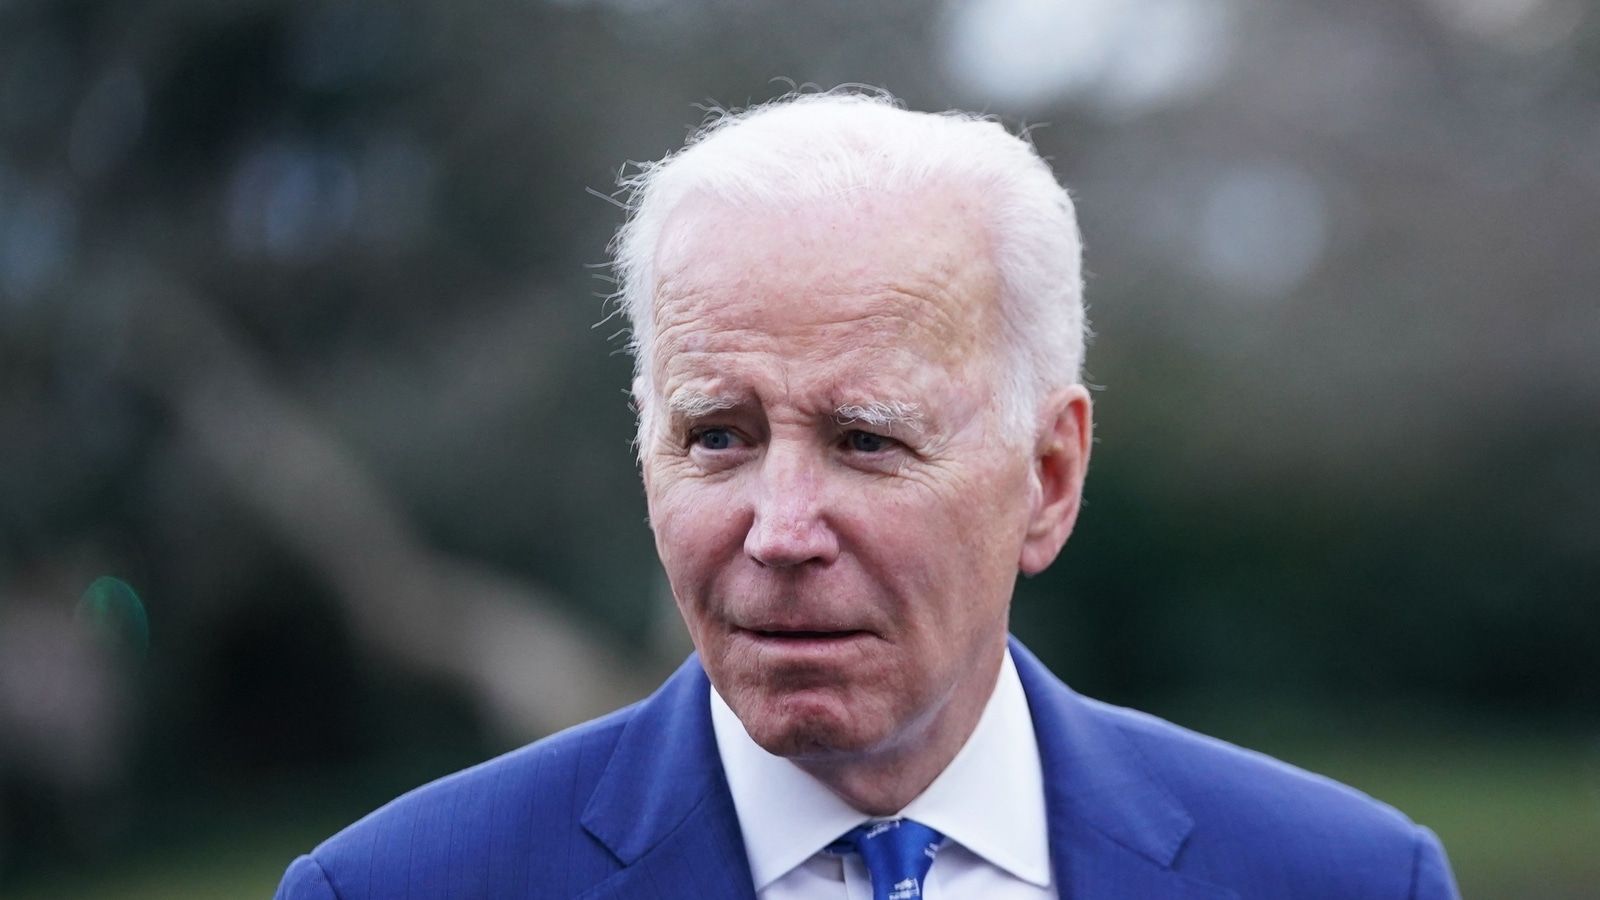 ‘US going to take care of…’: Biden on Chinese spy balloon